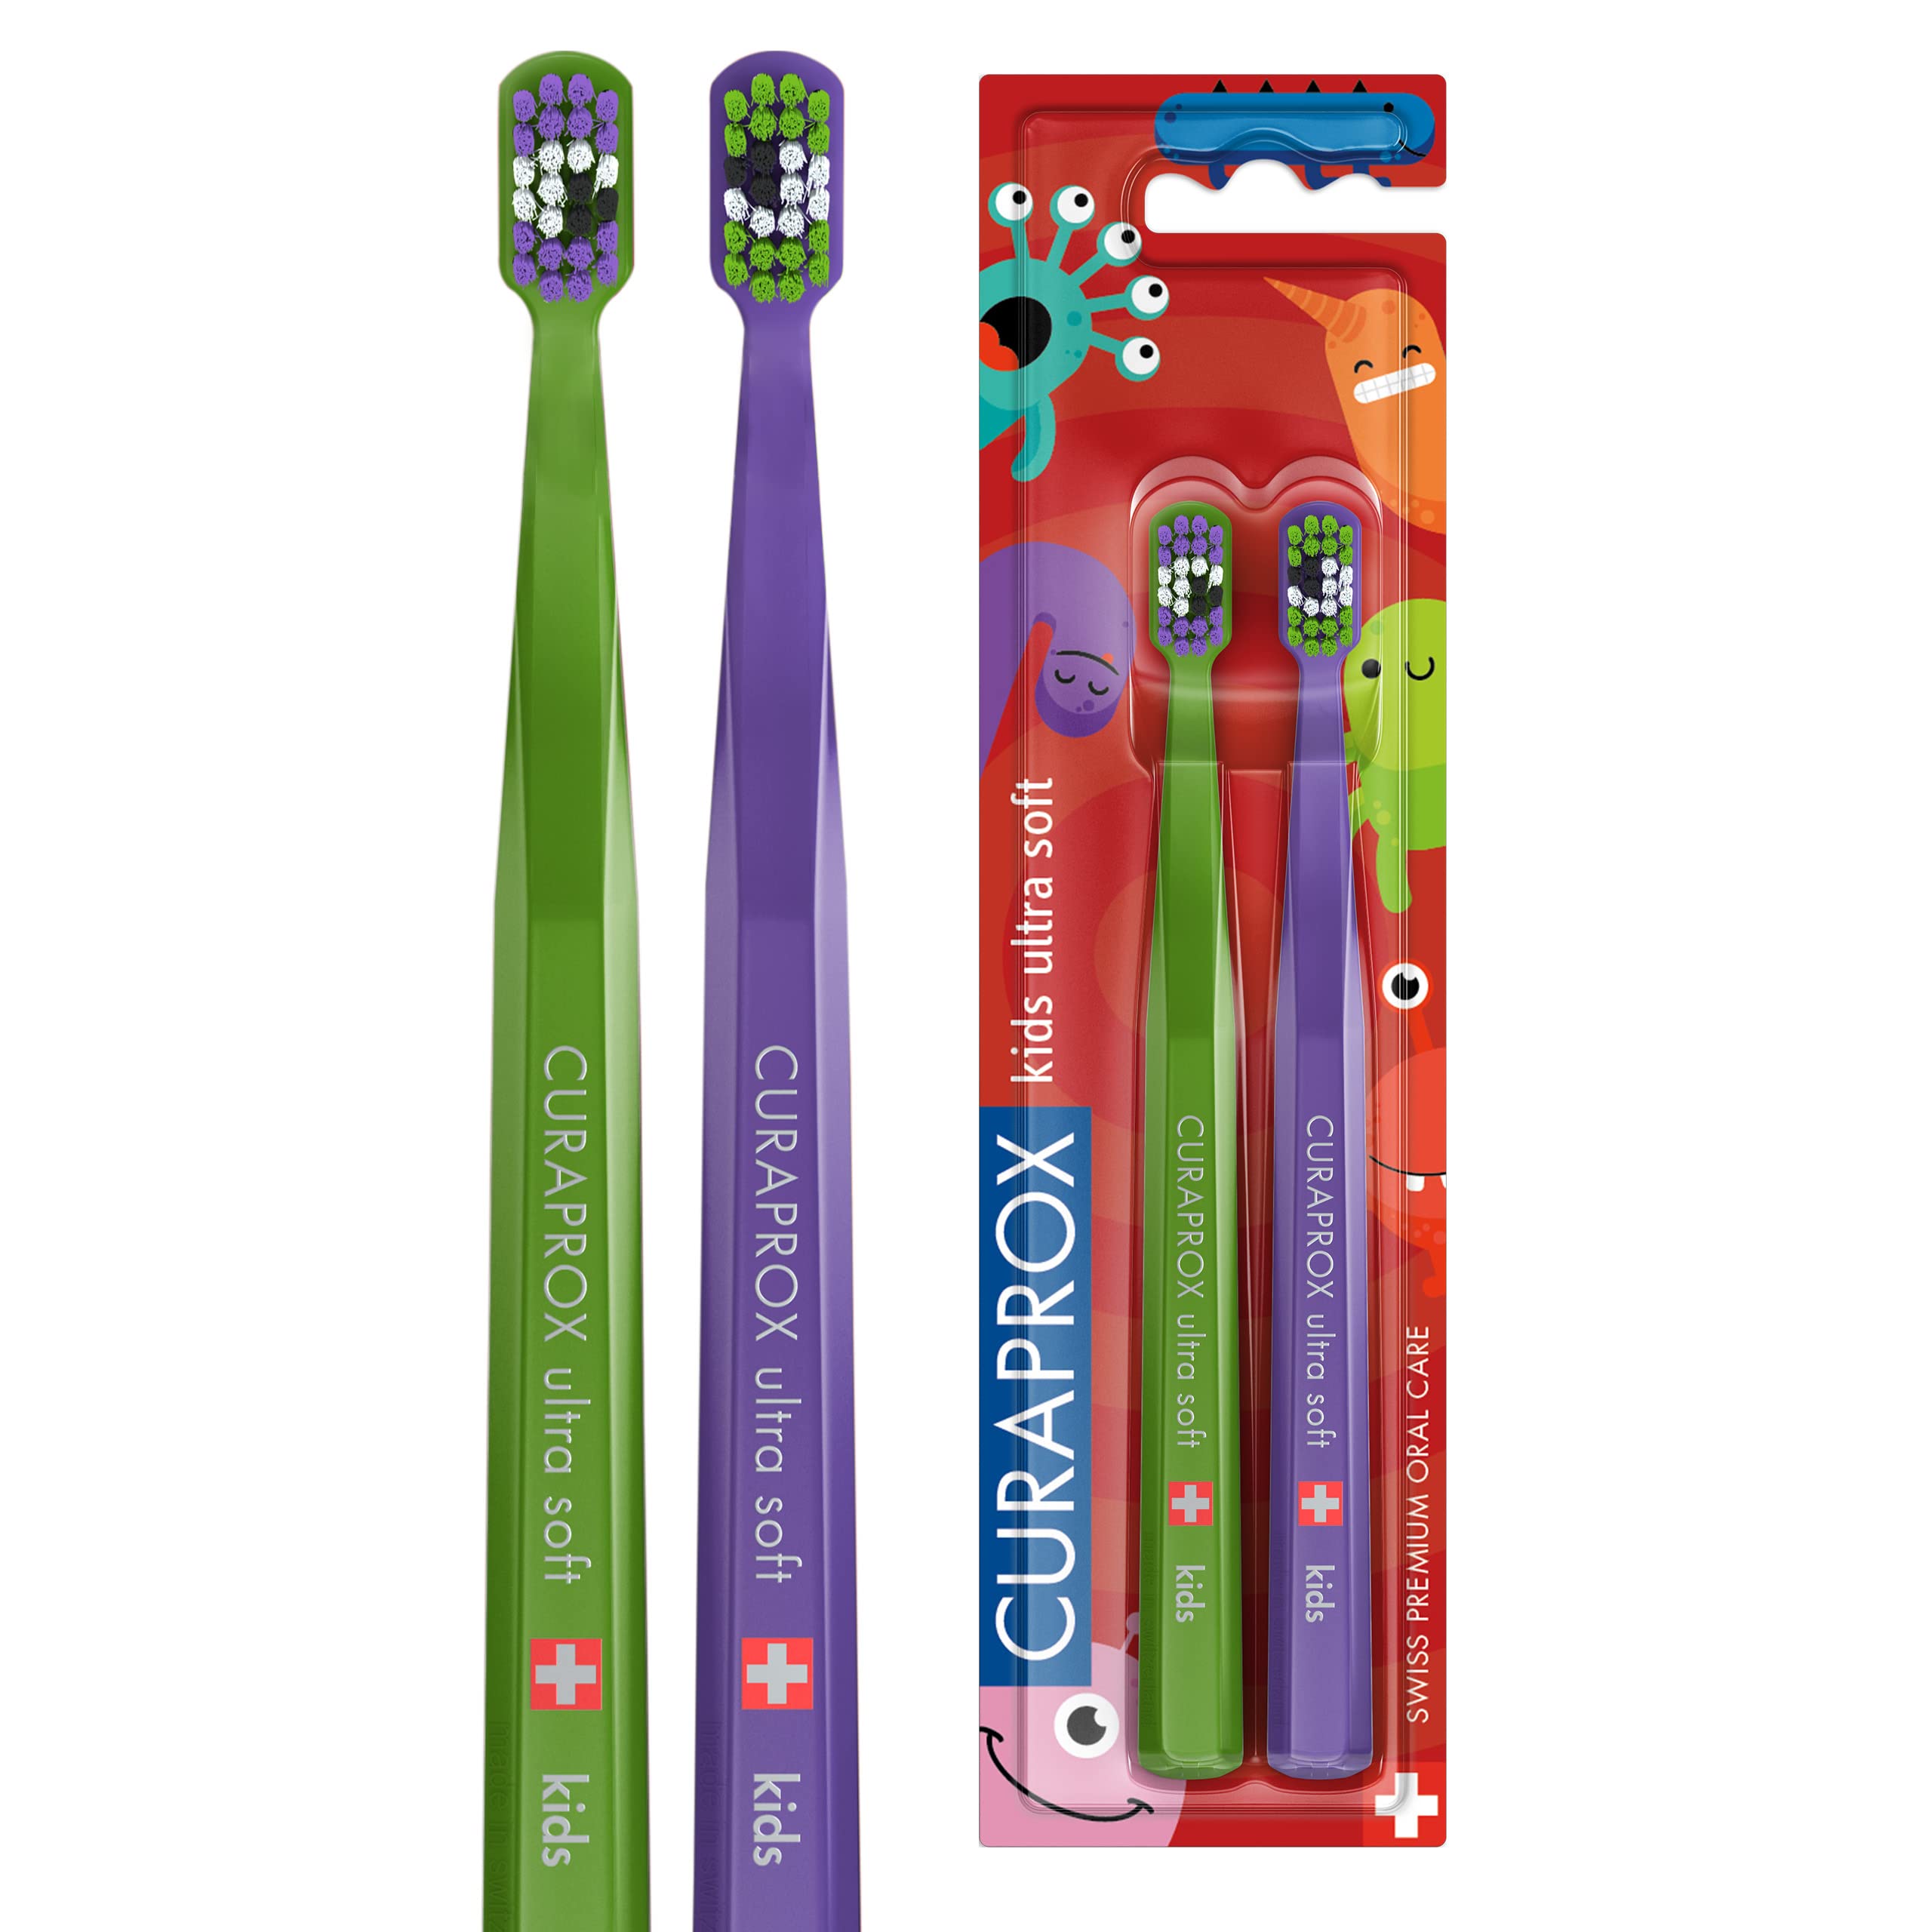 Curaprox CS Kids Manual Toothbrush Special Edition Happy Kids Pack of 2 Ultra  Soft Toothbrush for Children